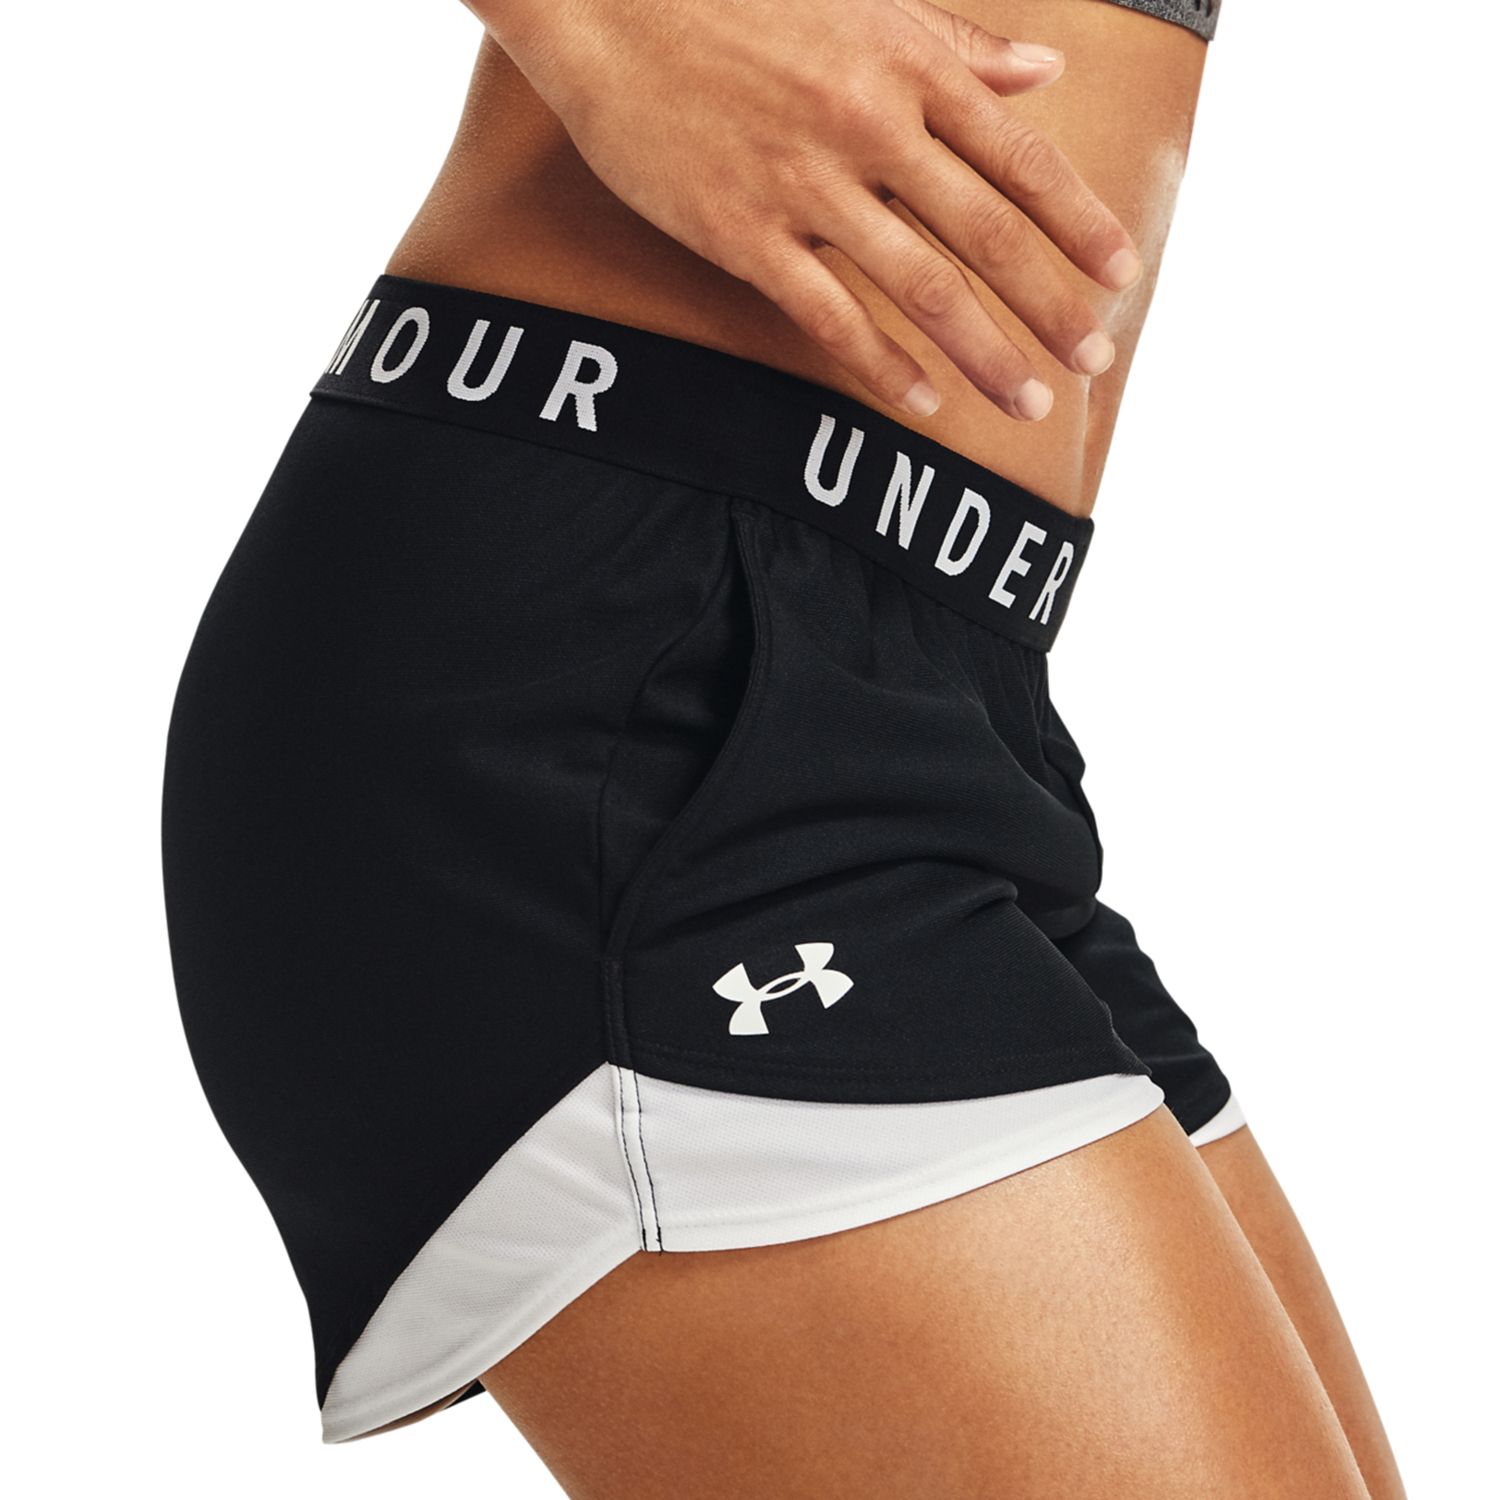 Women's Under Armour Play Up Shorts 3.0